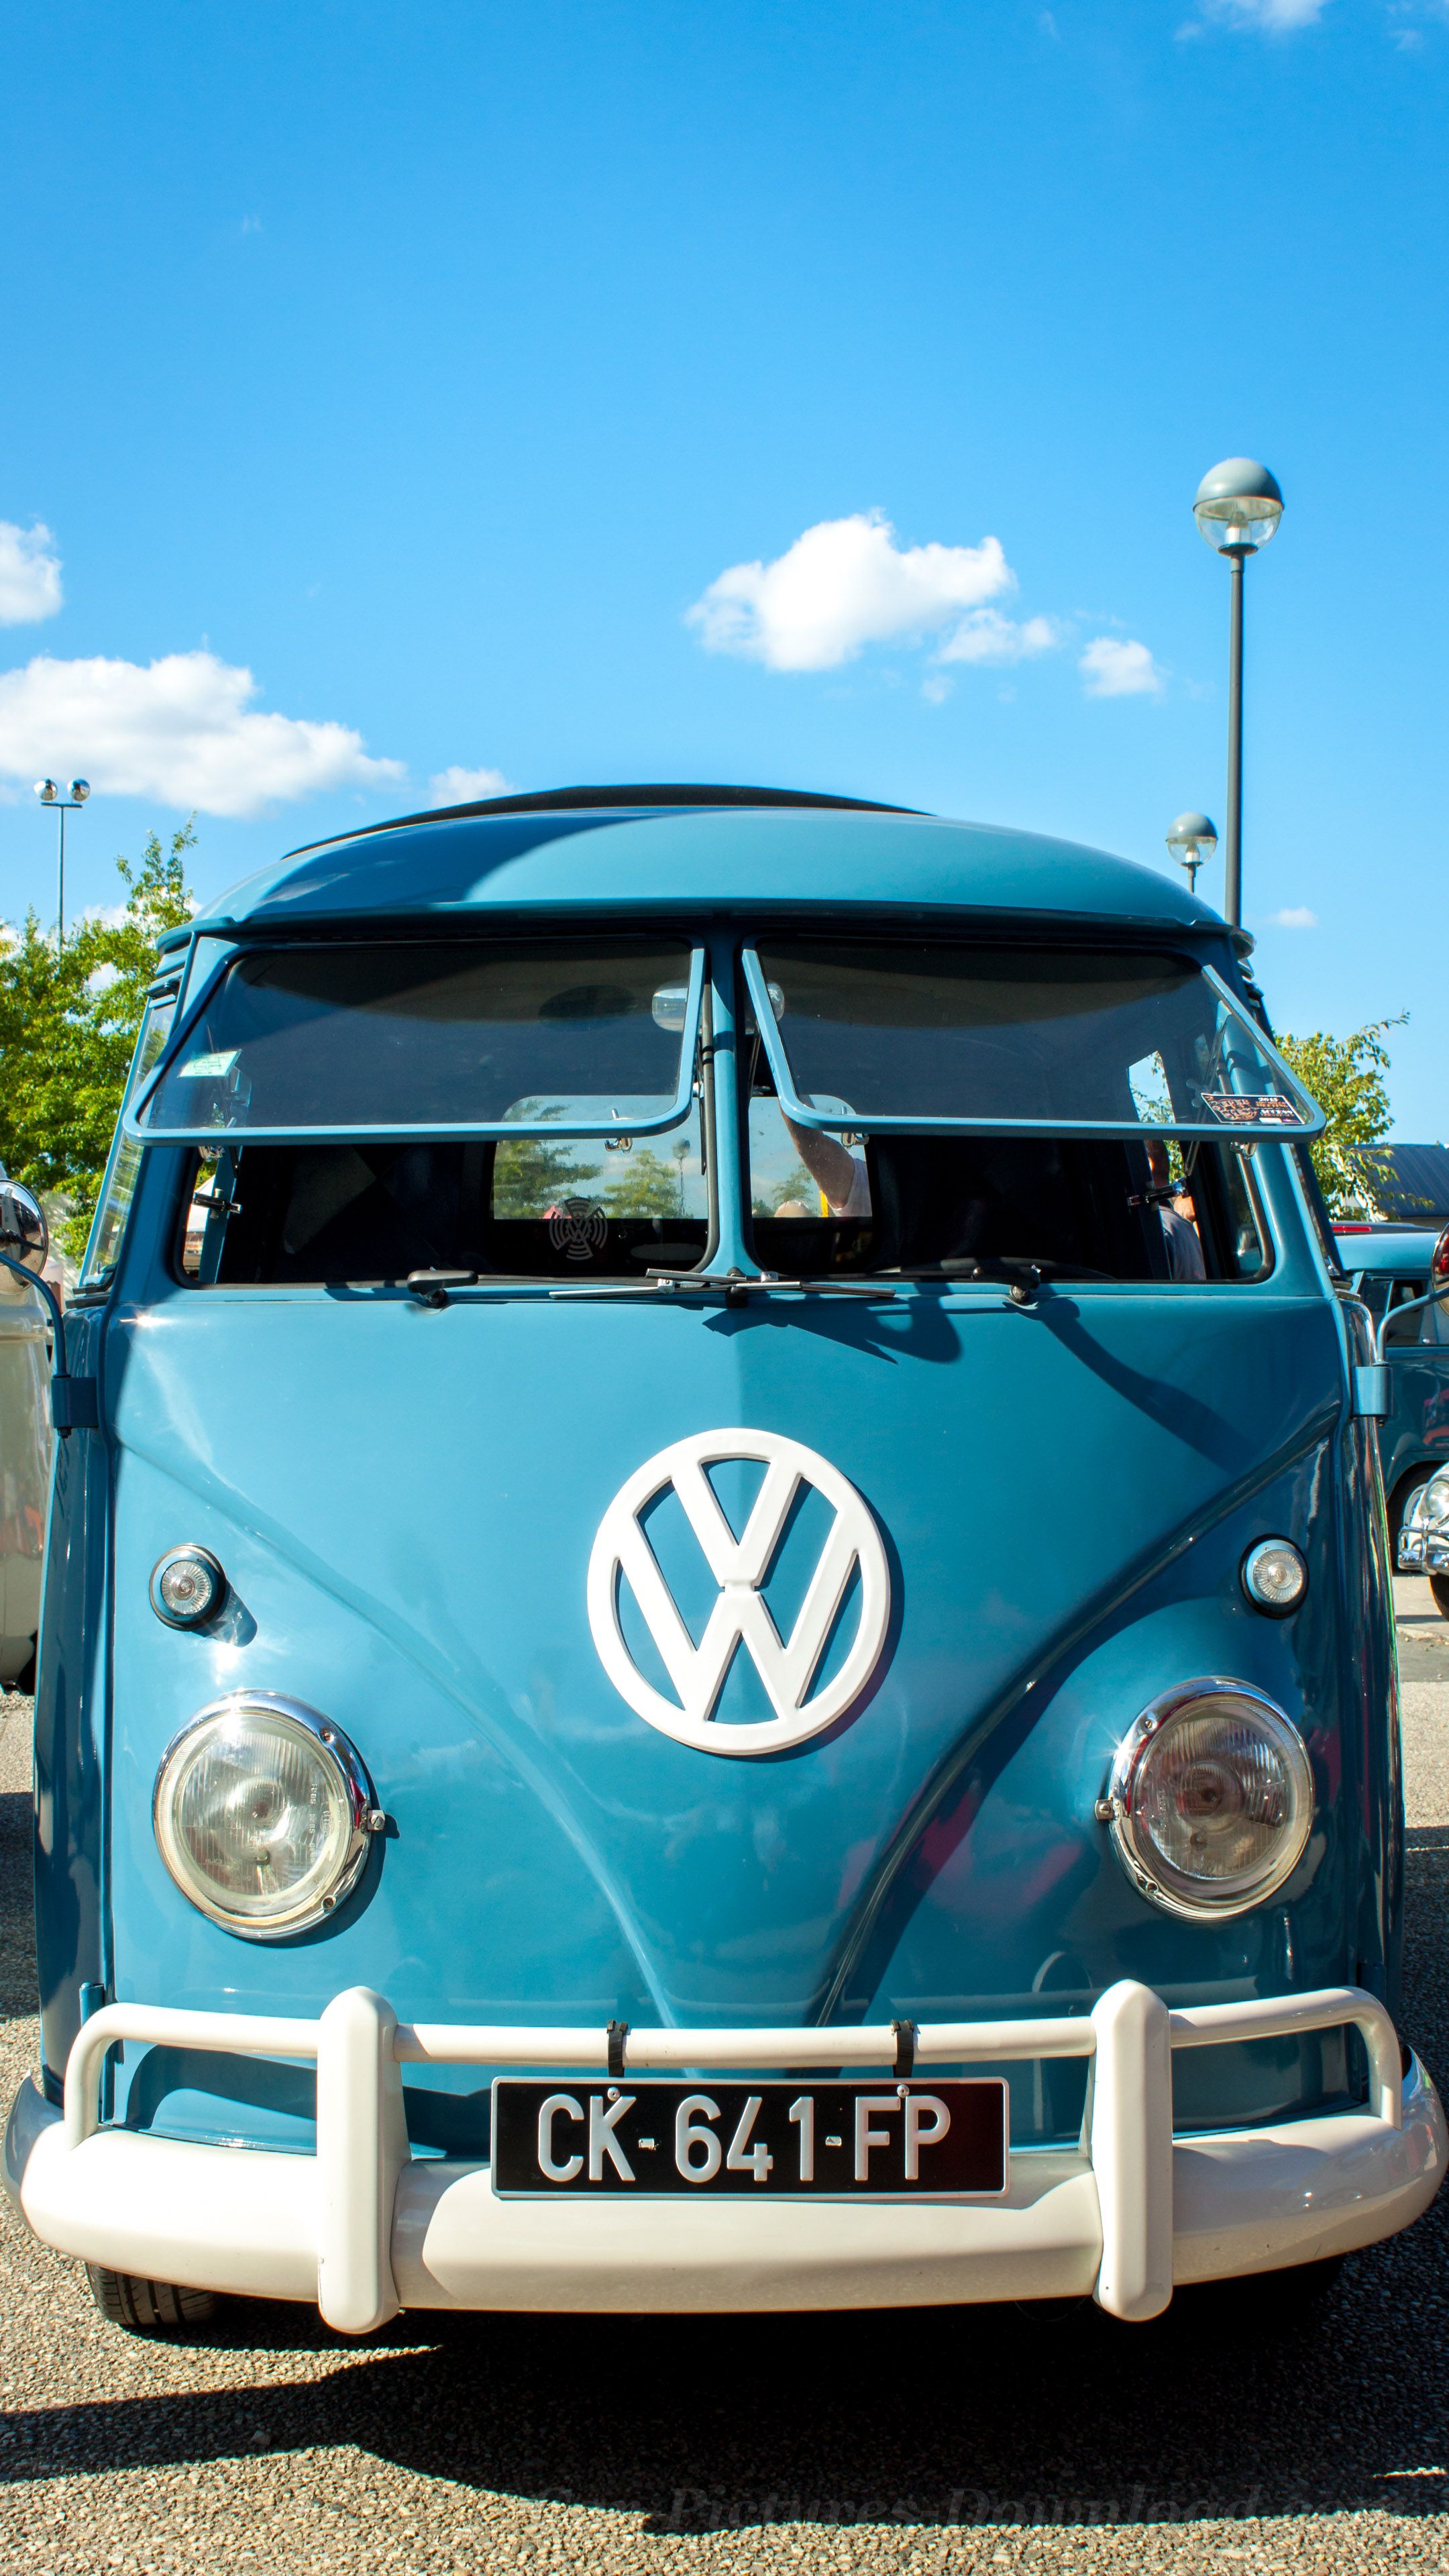 Vw Iphone Wallpapers Wallpaper Cave